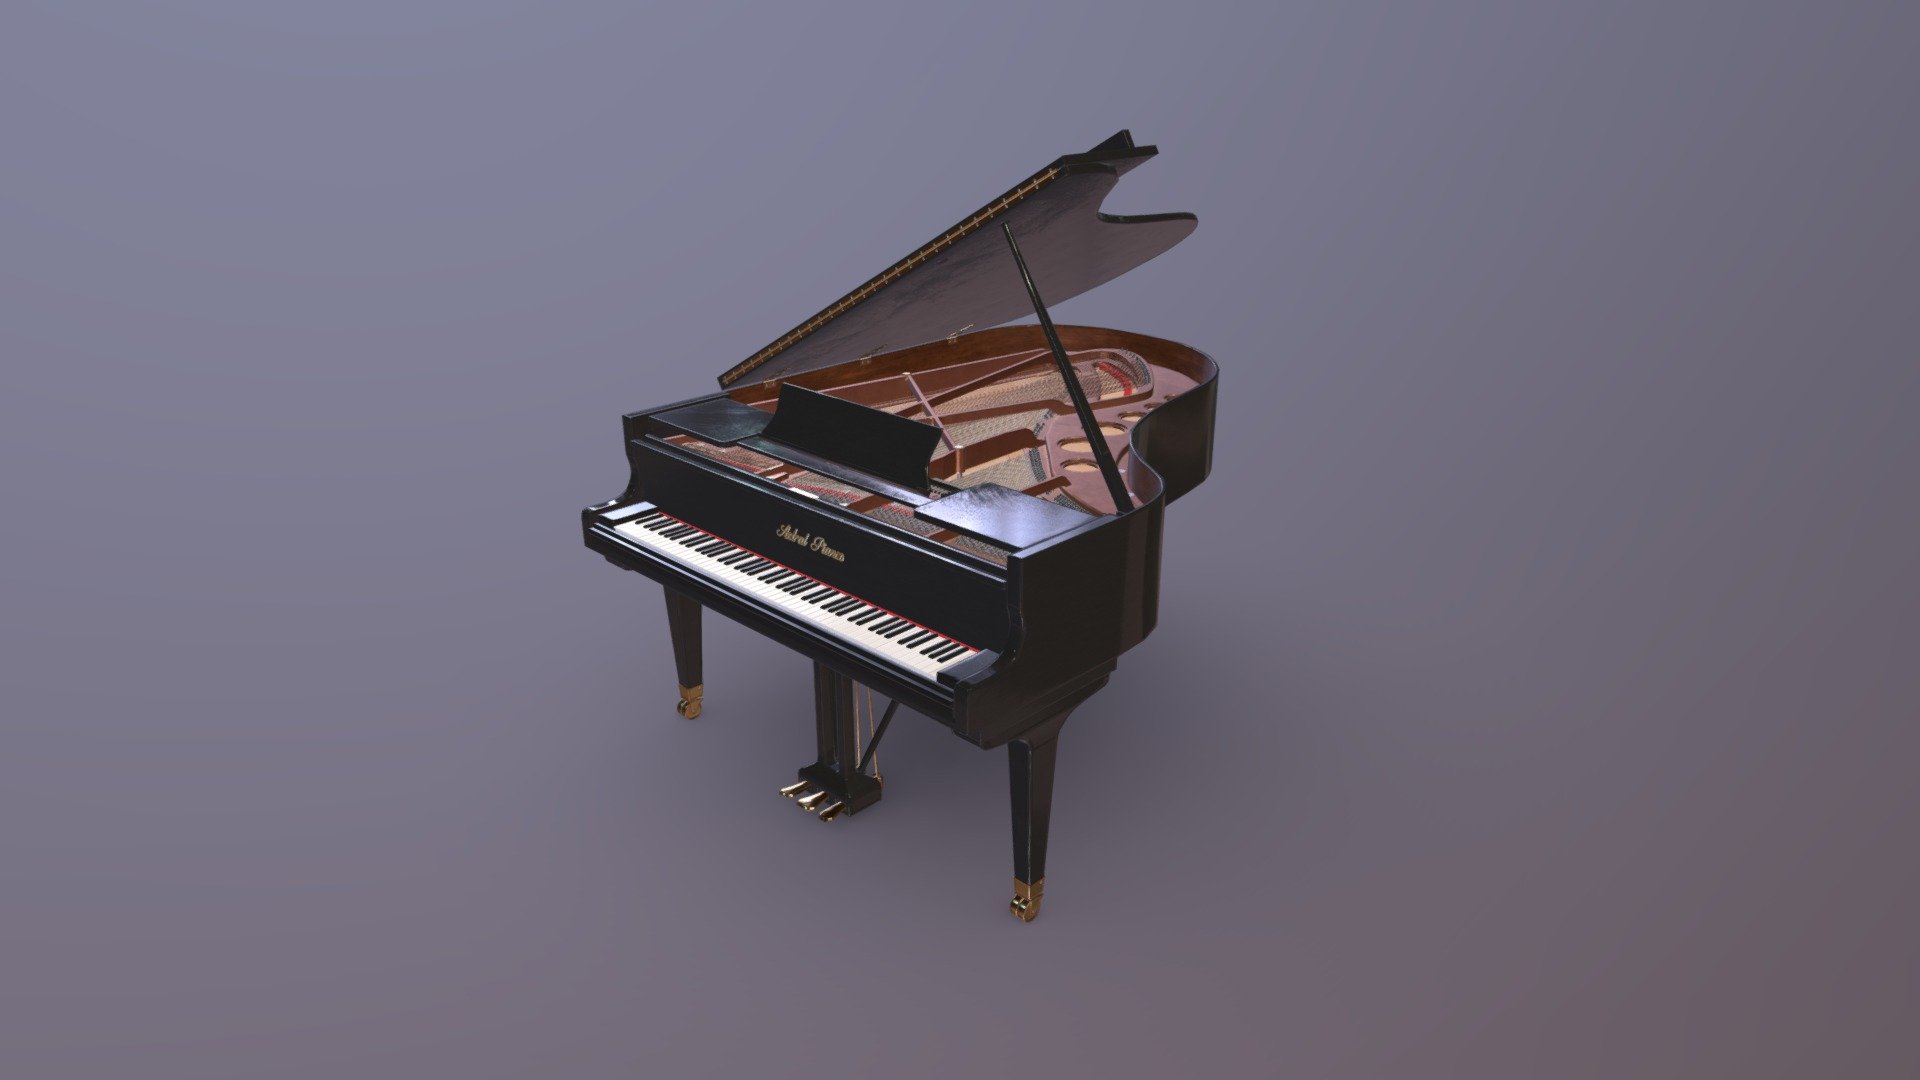 The Piano has LODs and UE4 ready Textures in 4k inside the additional Rar file.
Real size modeled. 
Uv are optimized and only overlapping on similar parts 3d model